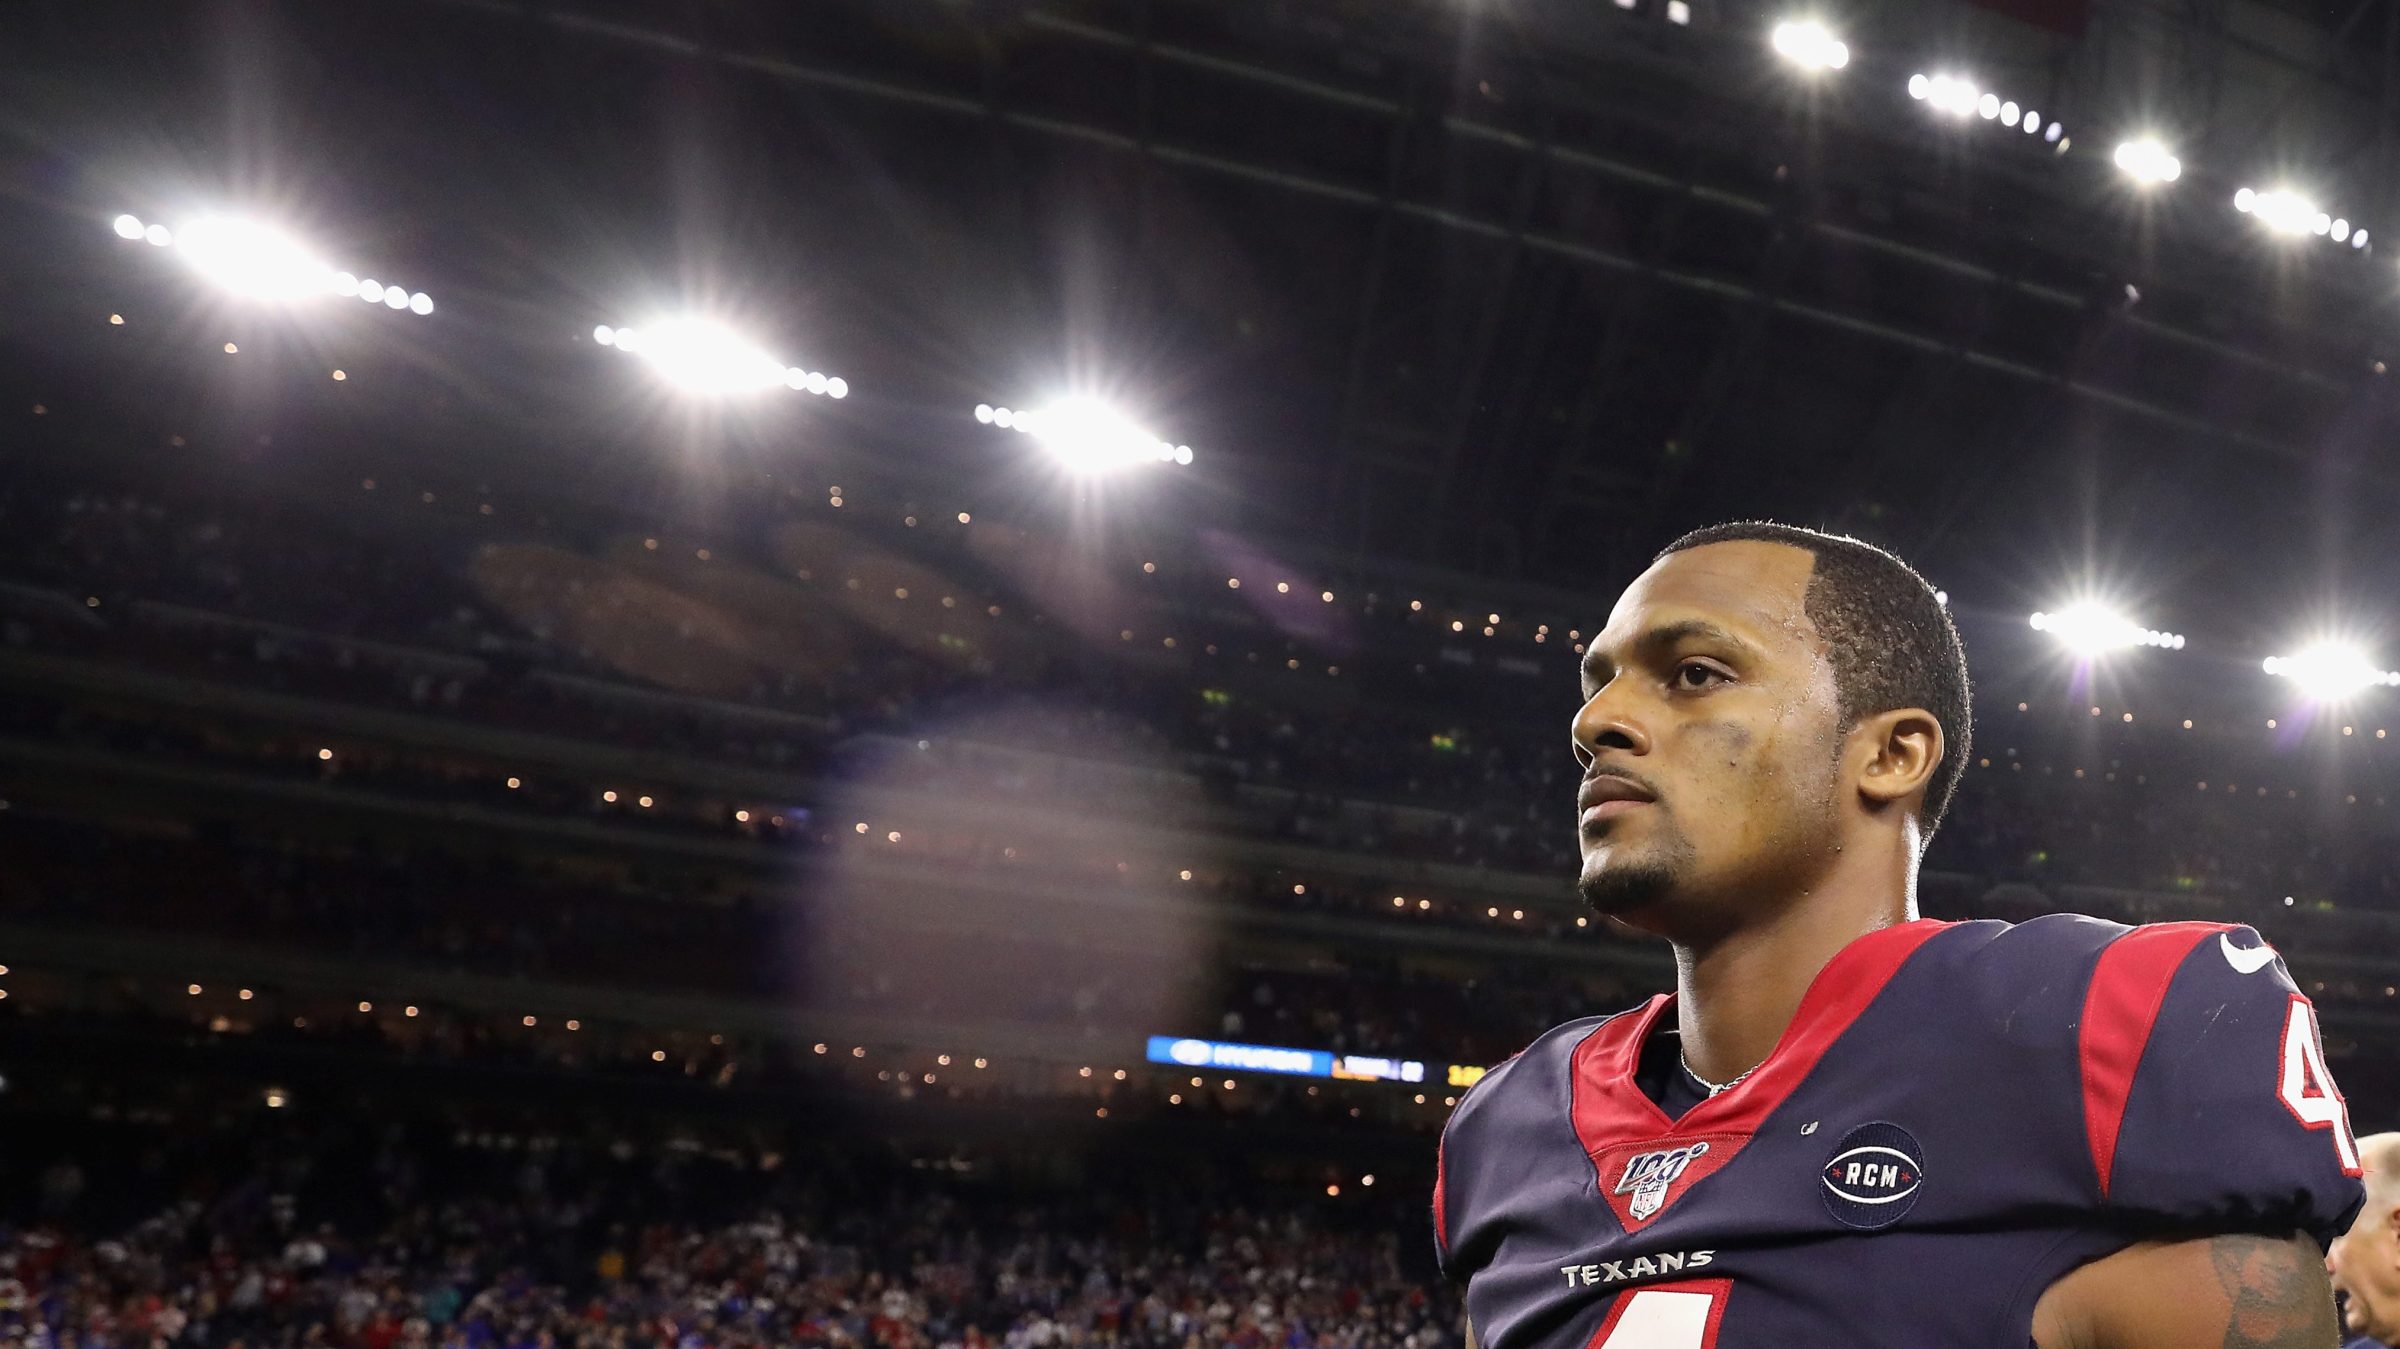 Quarterback Deshaun Watson #4 of the Houston Texans walks off the field following the AFC Wild Card Playoff game against the Buffalo Bills at NRG Stadium on January 04, 2020 in Houston, Texas. Watson is dressed in his uniform. In the background are stadium lights and fans.